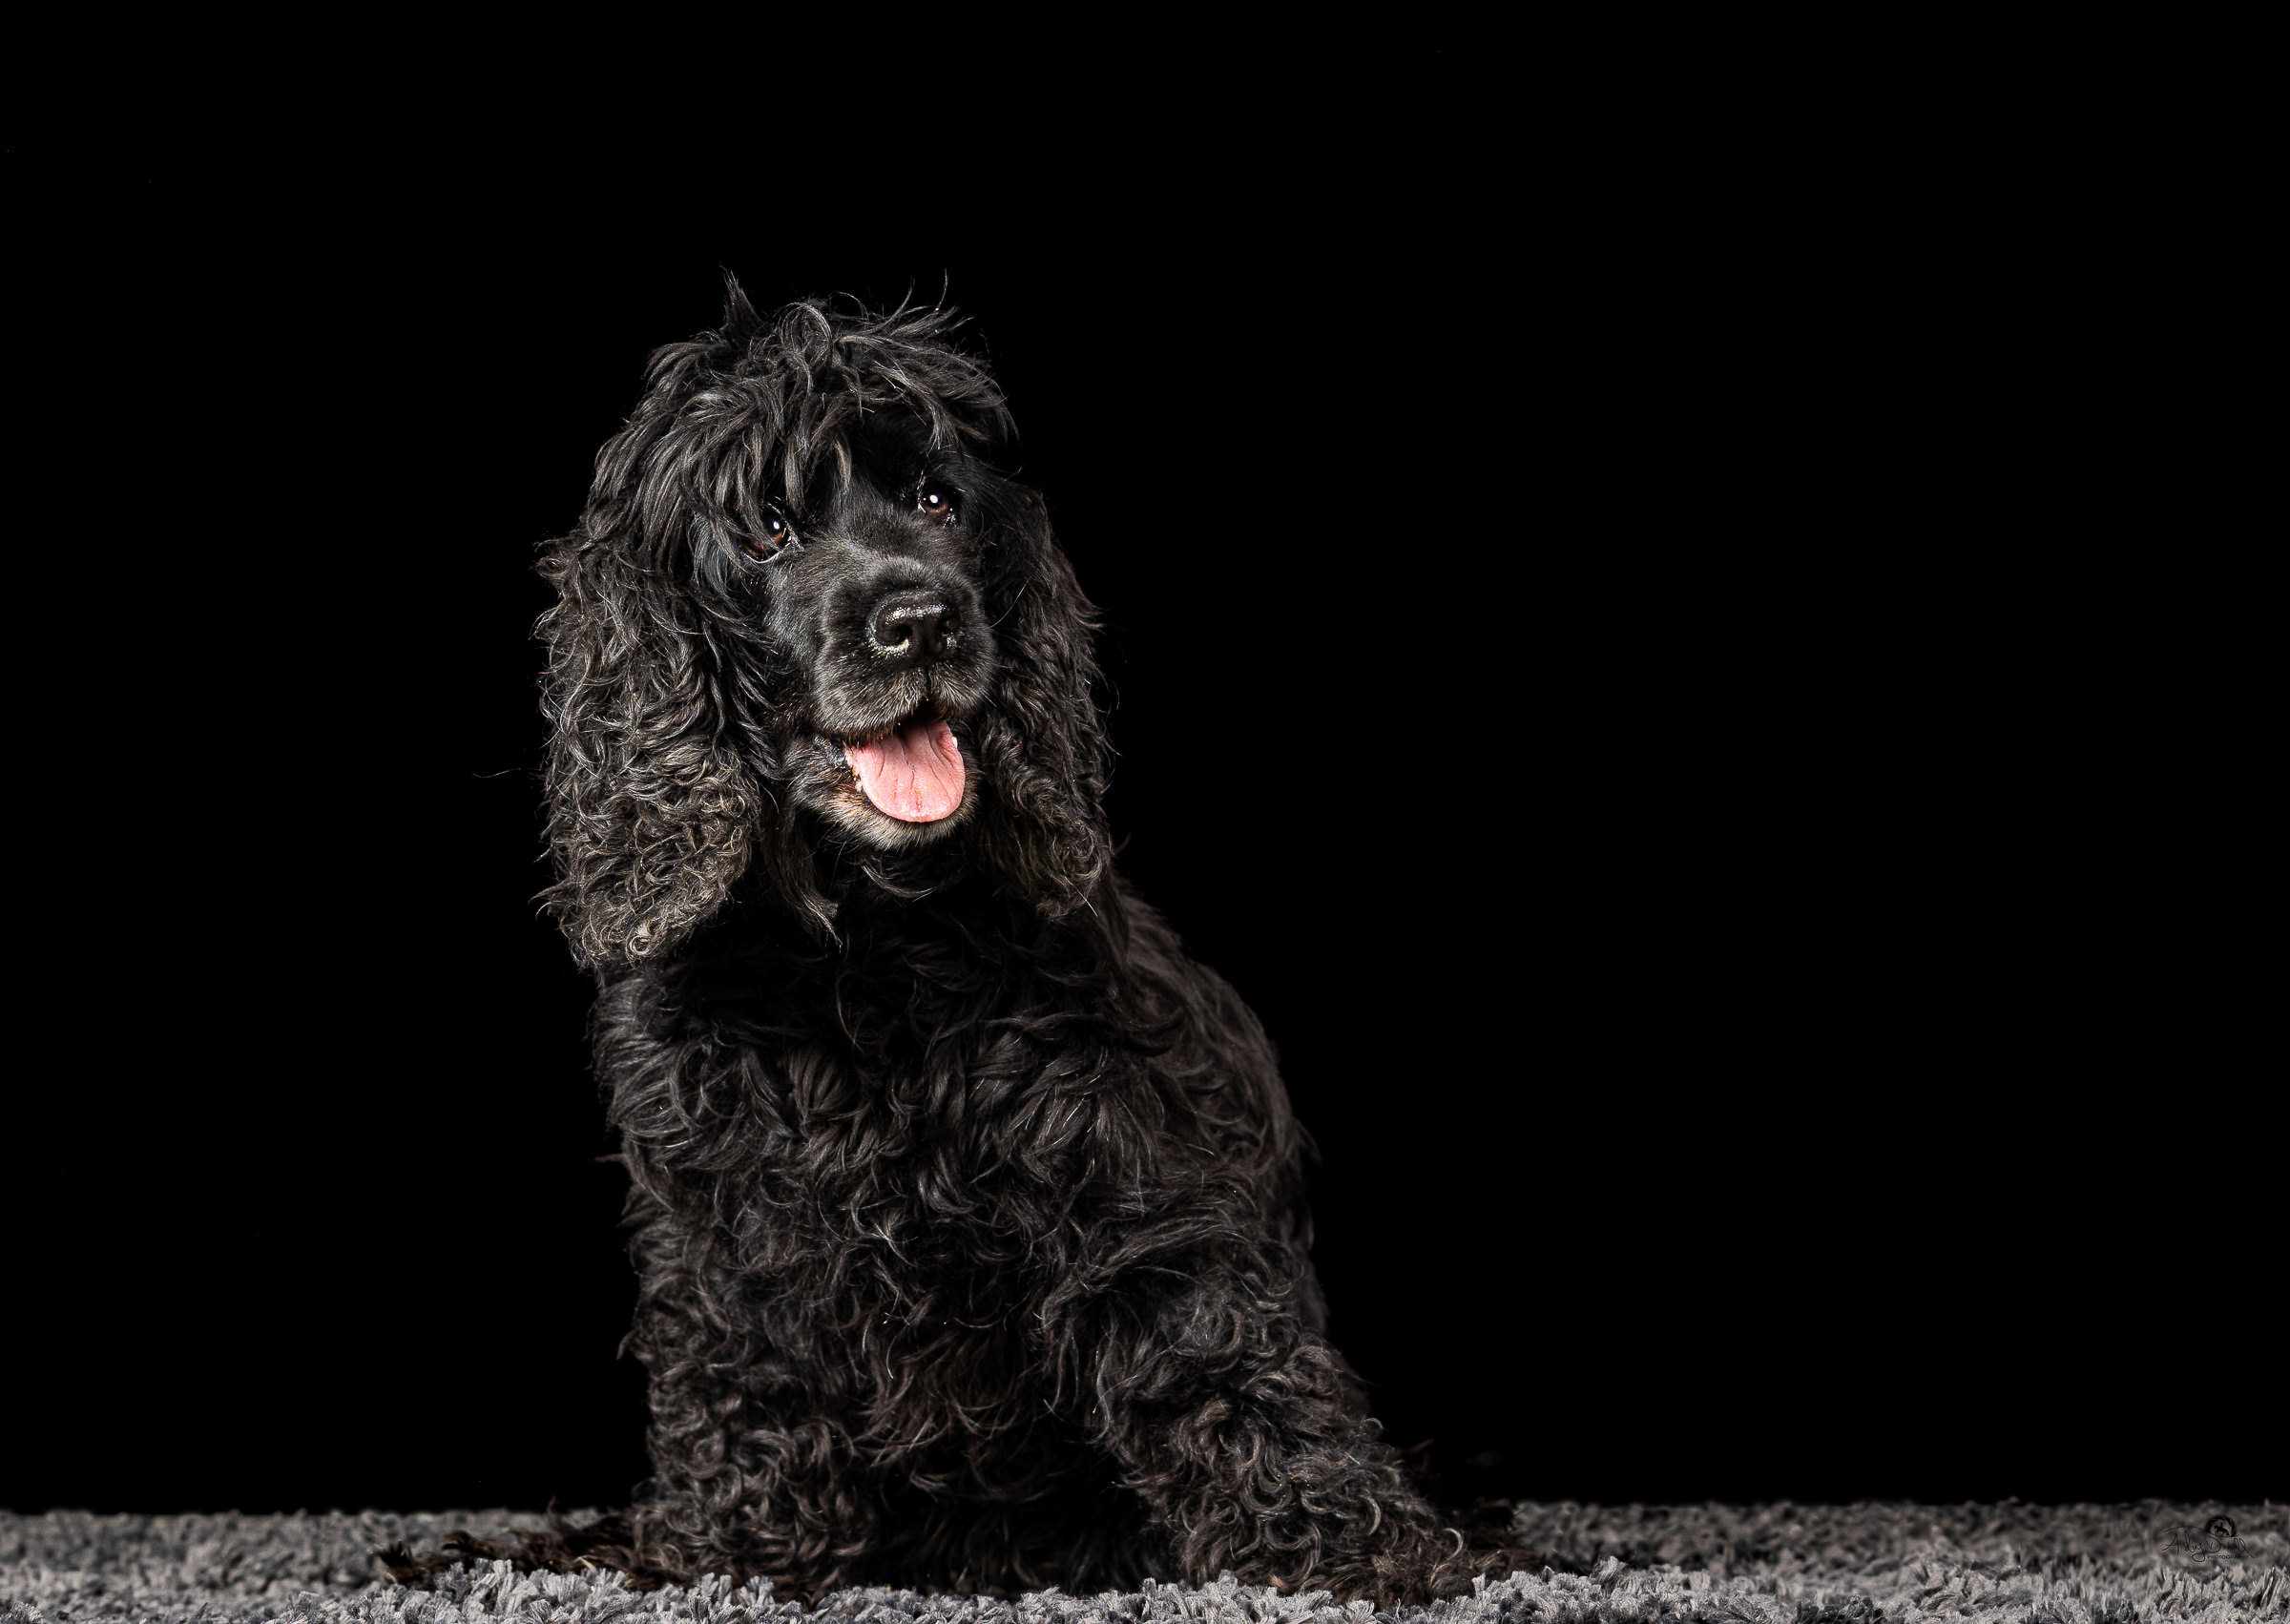 pet photography image of a black cocker spaniel in a studio with black background